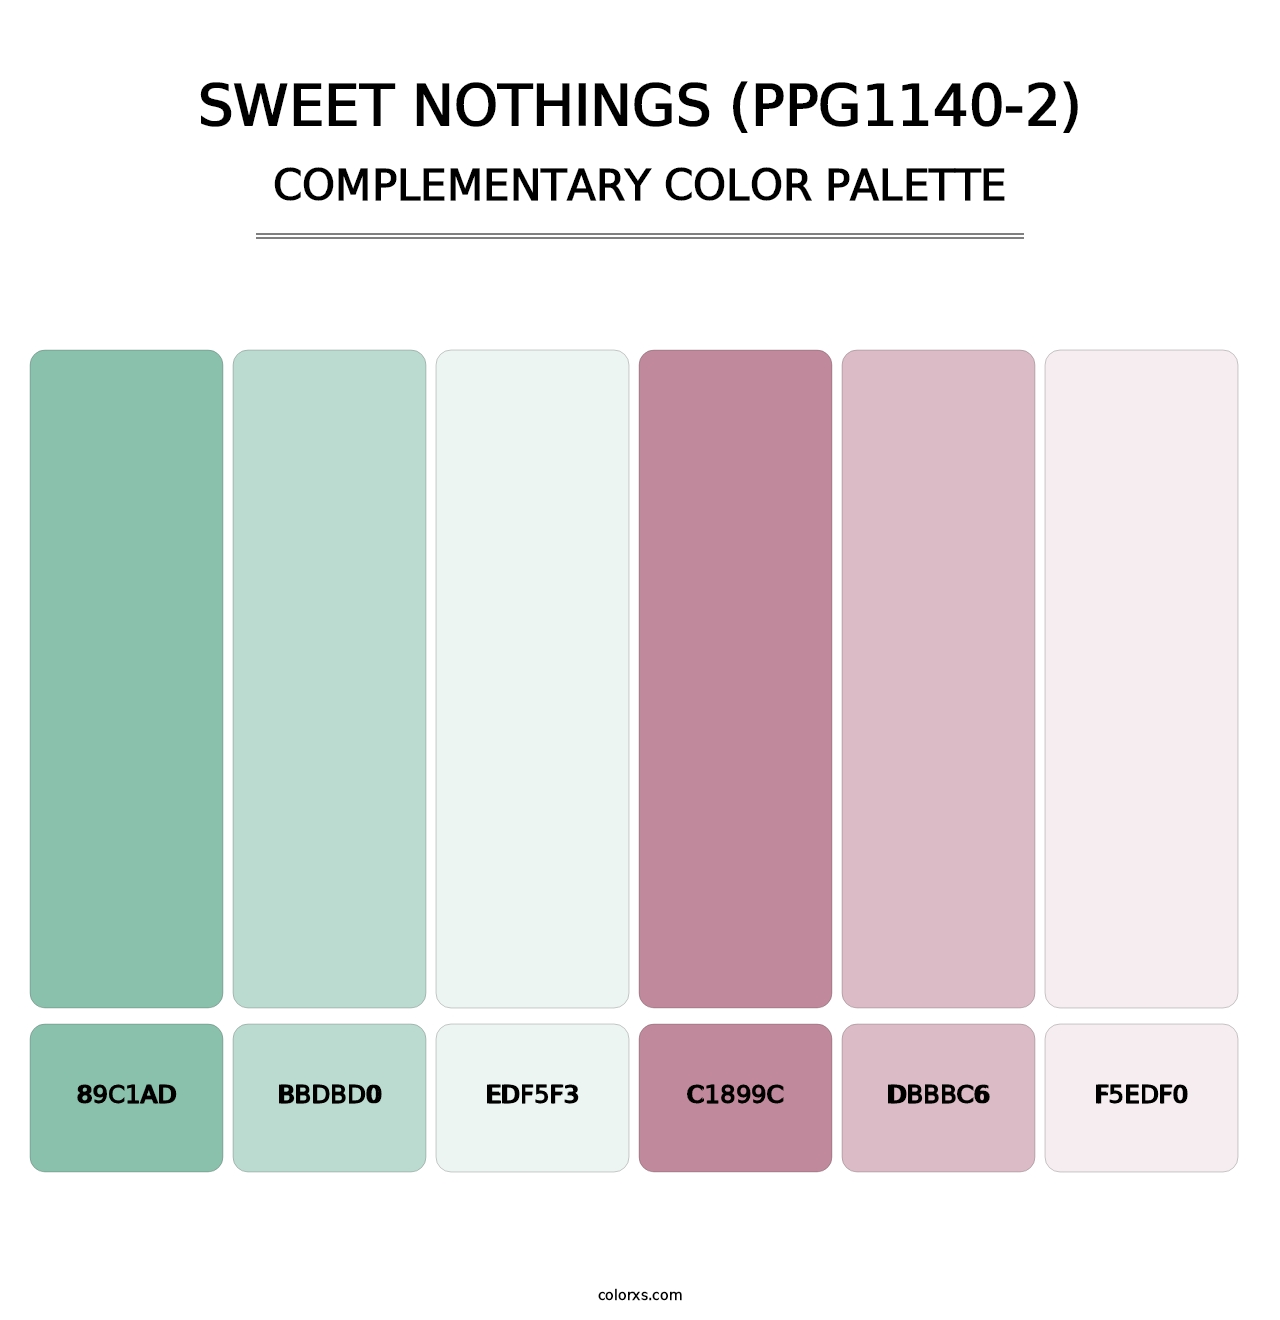 Sweet Nothings (PPG1140-2) - Complementary Color Palette